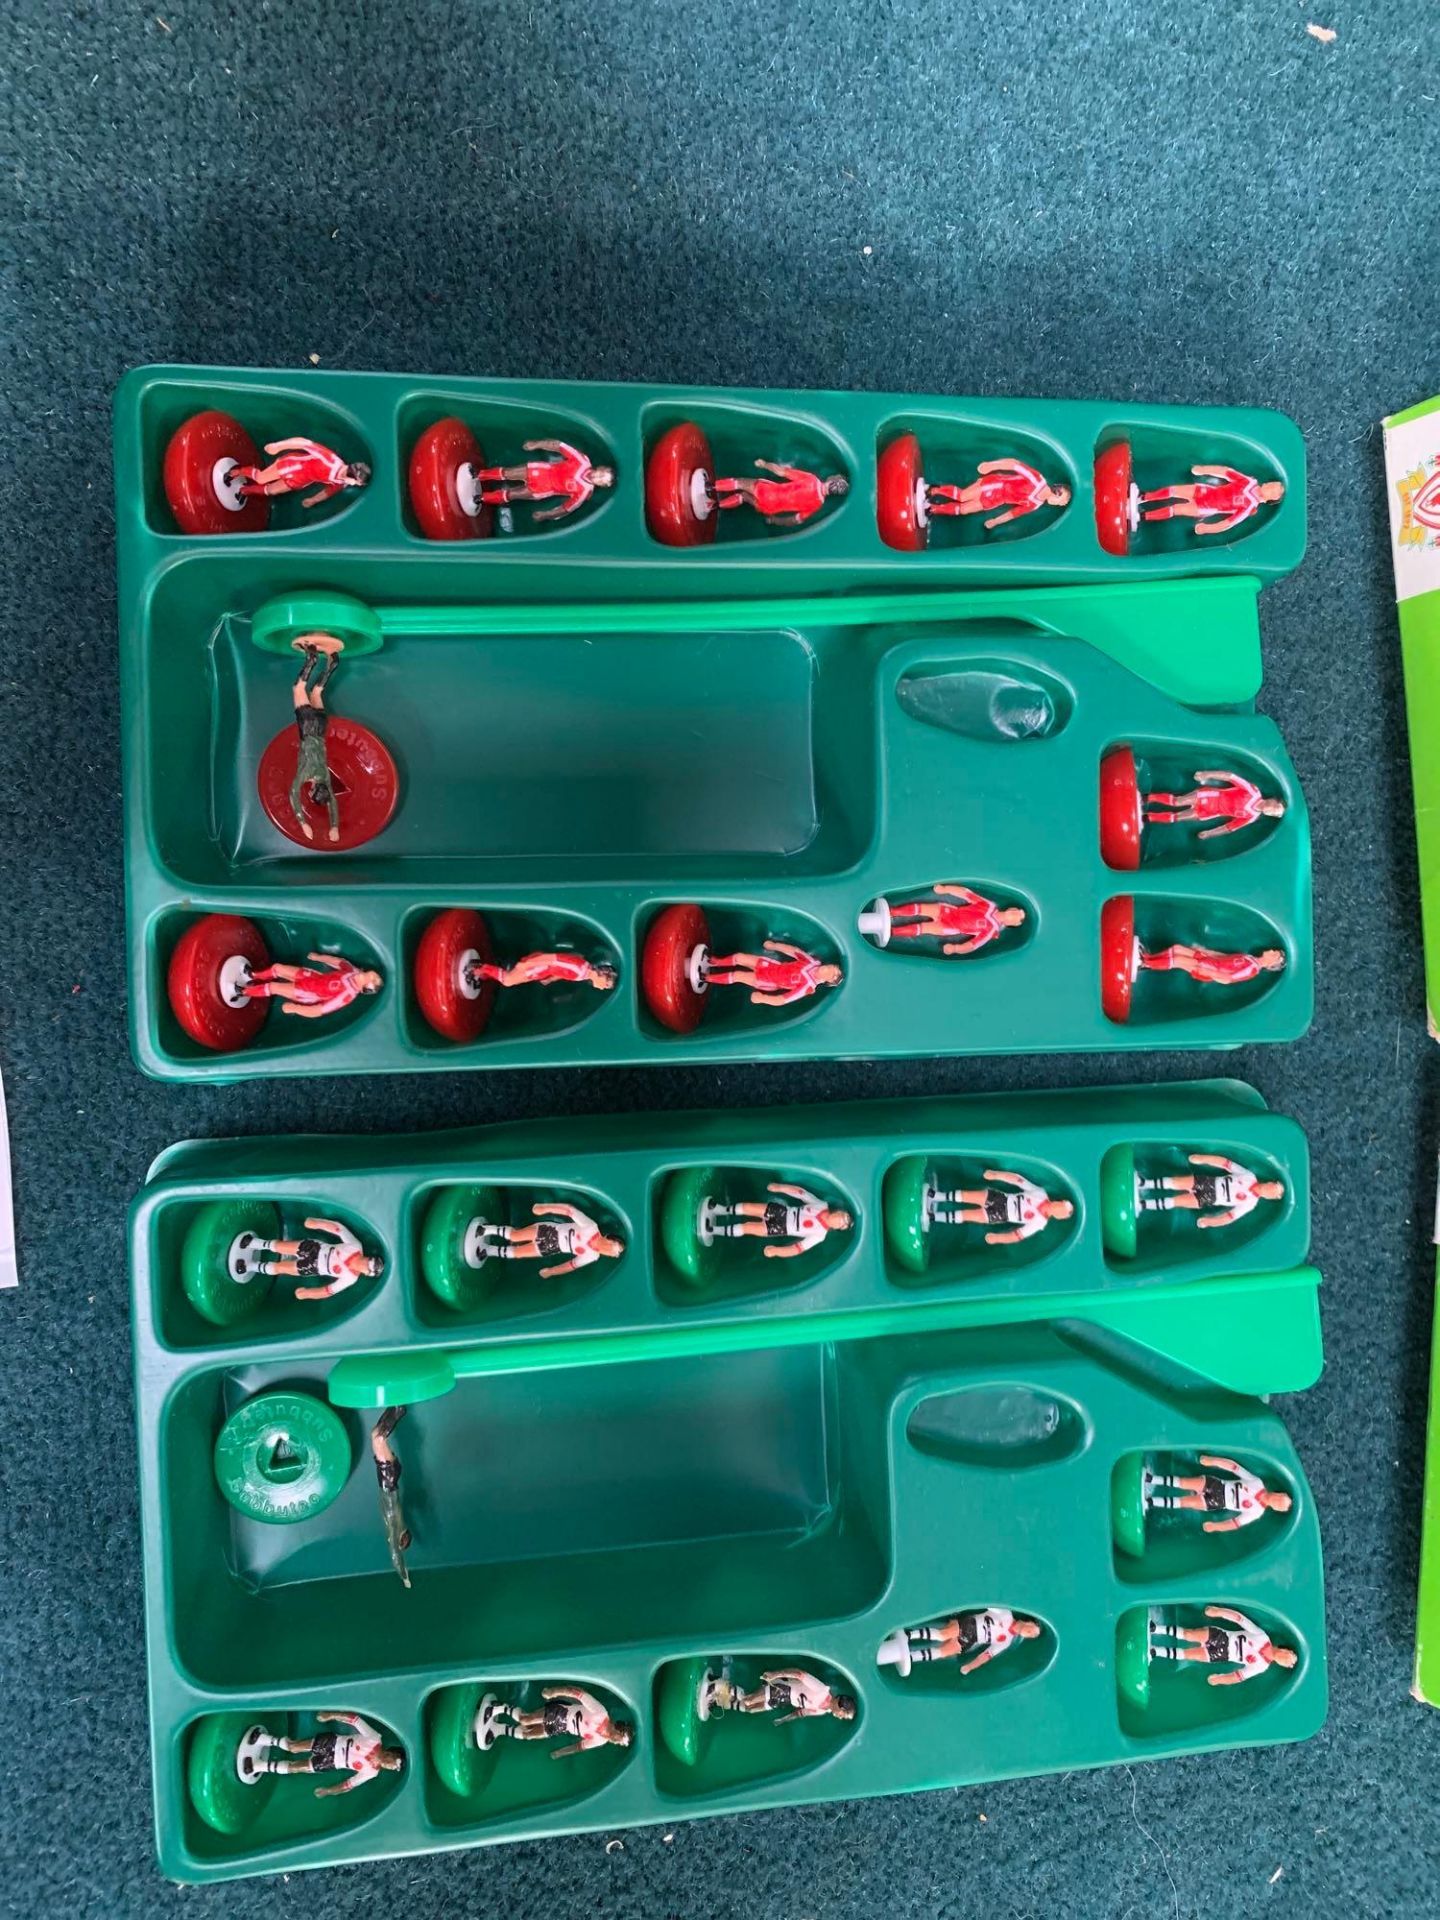 Subbuteo Liverpool Team Kits Includes Ref.63741 Premier League Team Liverpool 1996 Home Kit And - Image 4 of 4